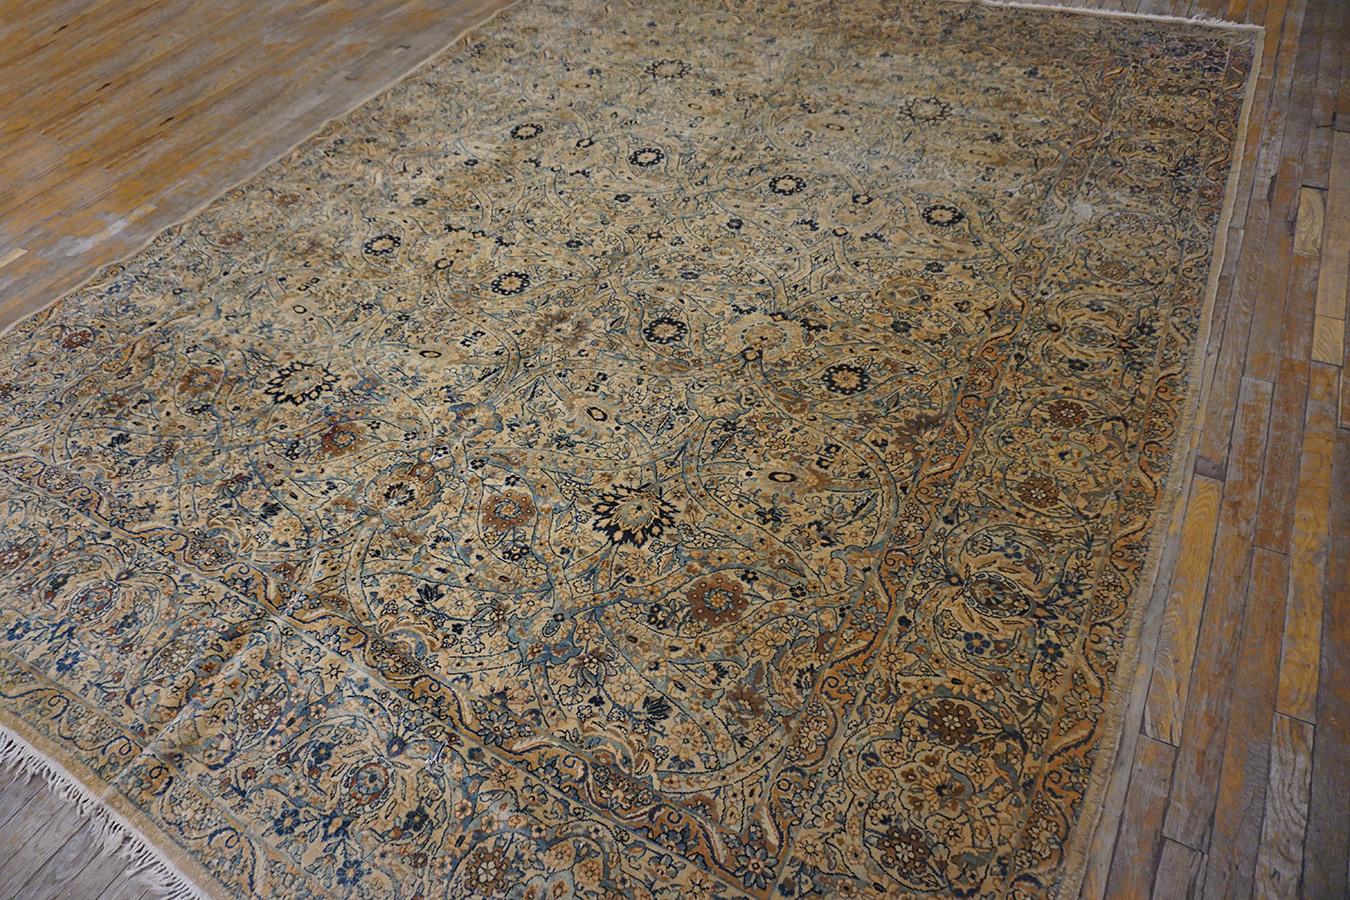 Hand-Knotted Early 20th Century Persian Kirman Carpet ( 9' x 11'9